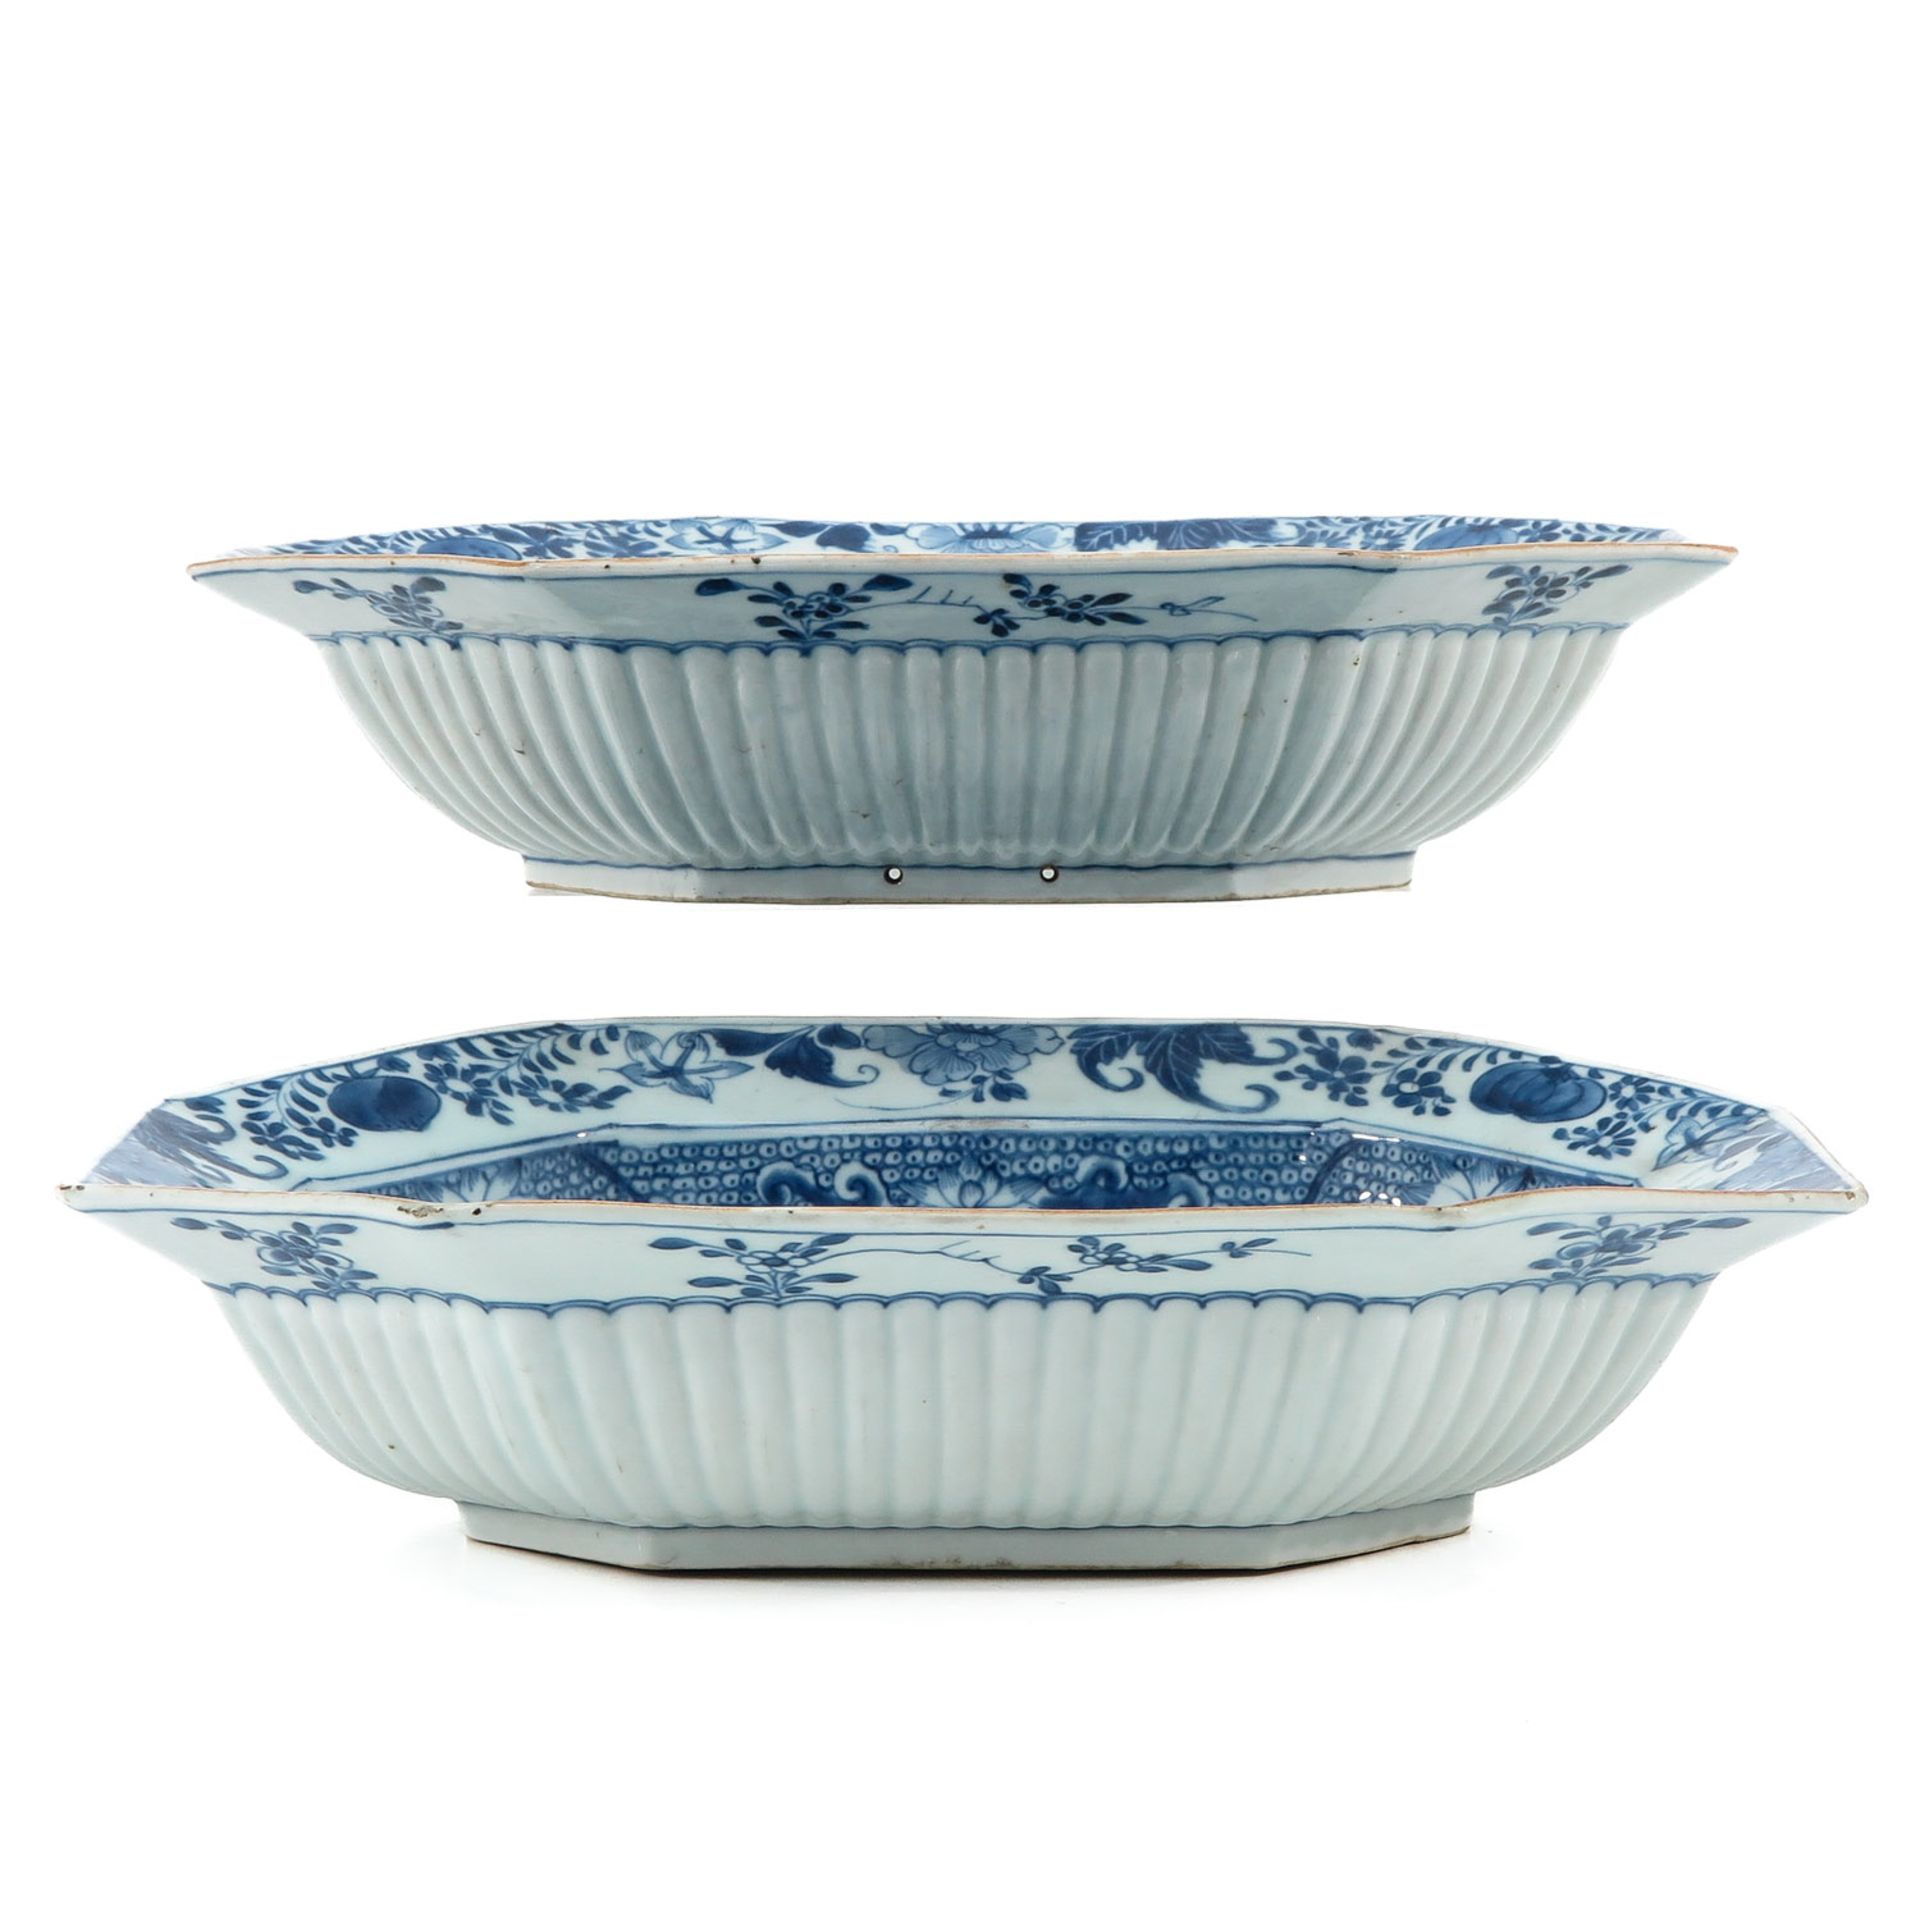 A Pair of Blue and White Serving Bowls